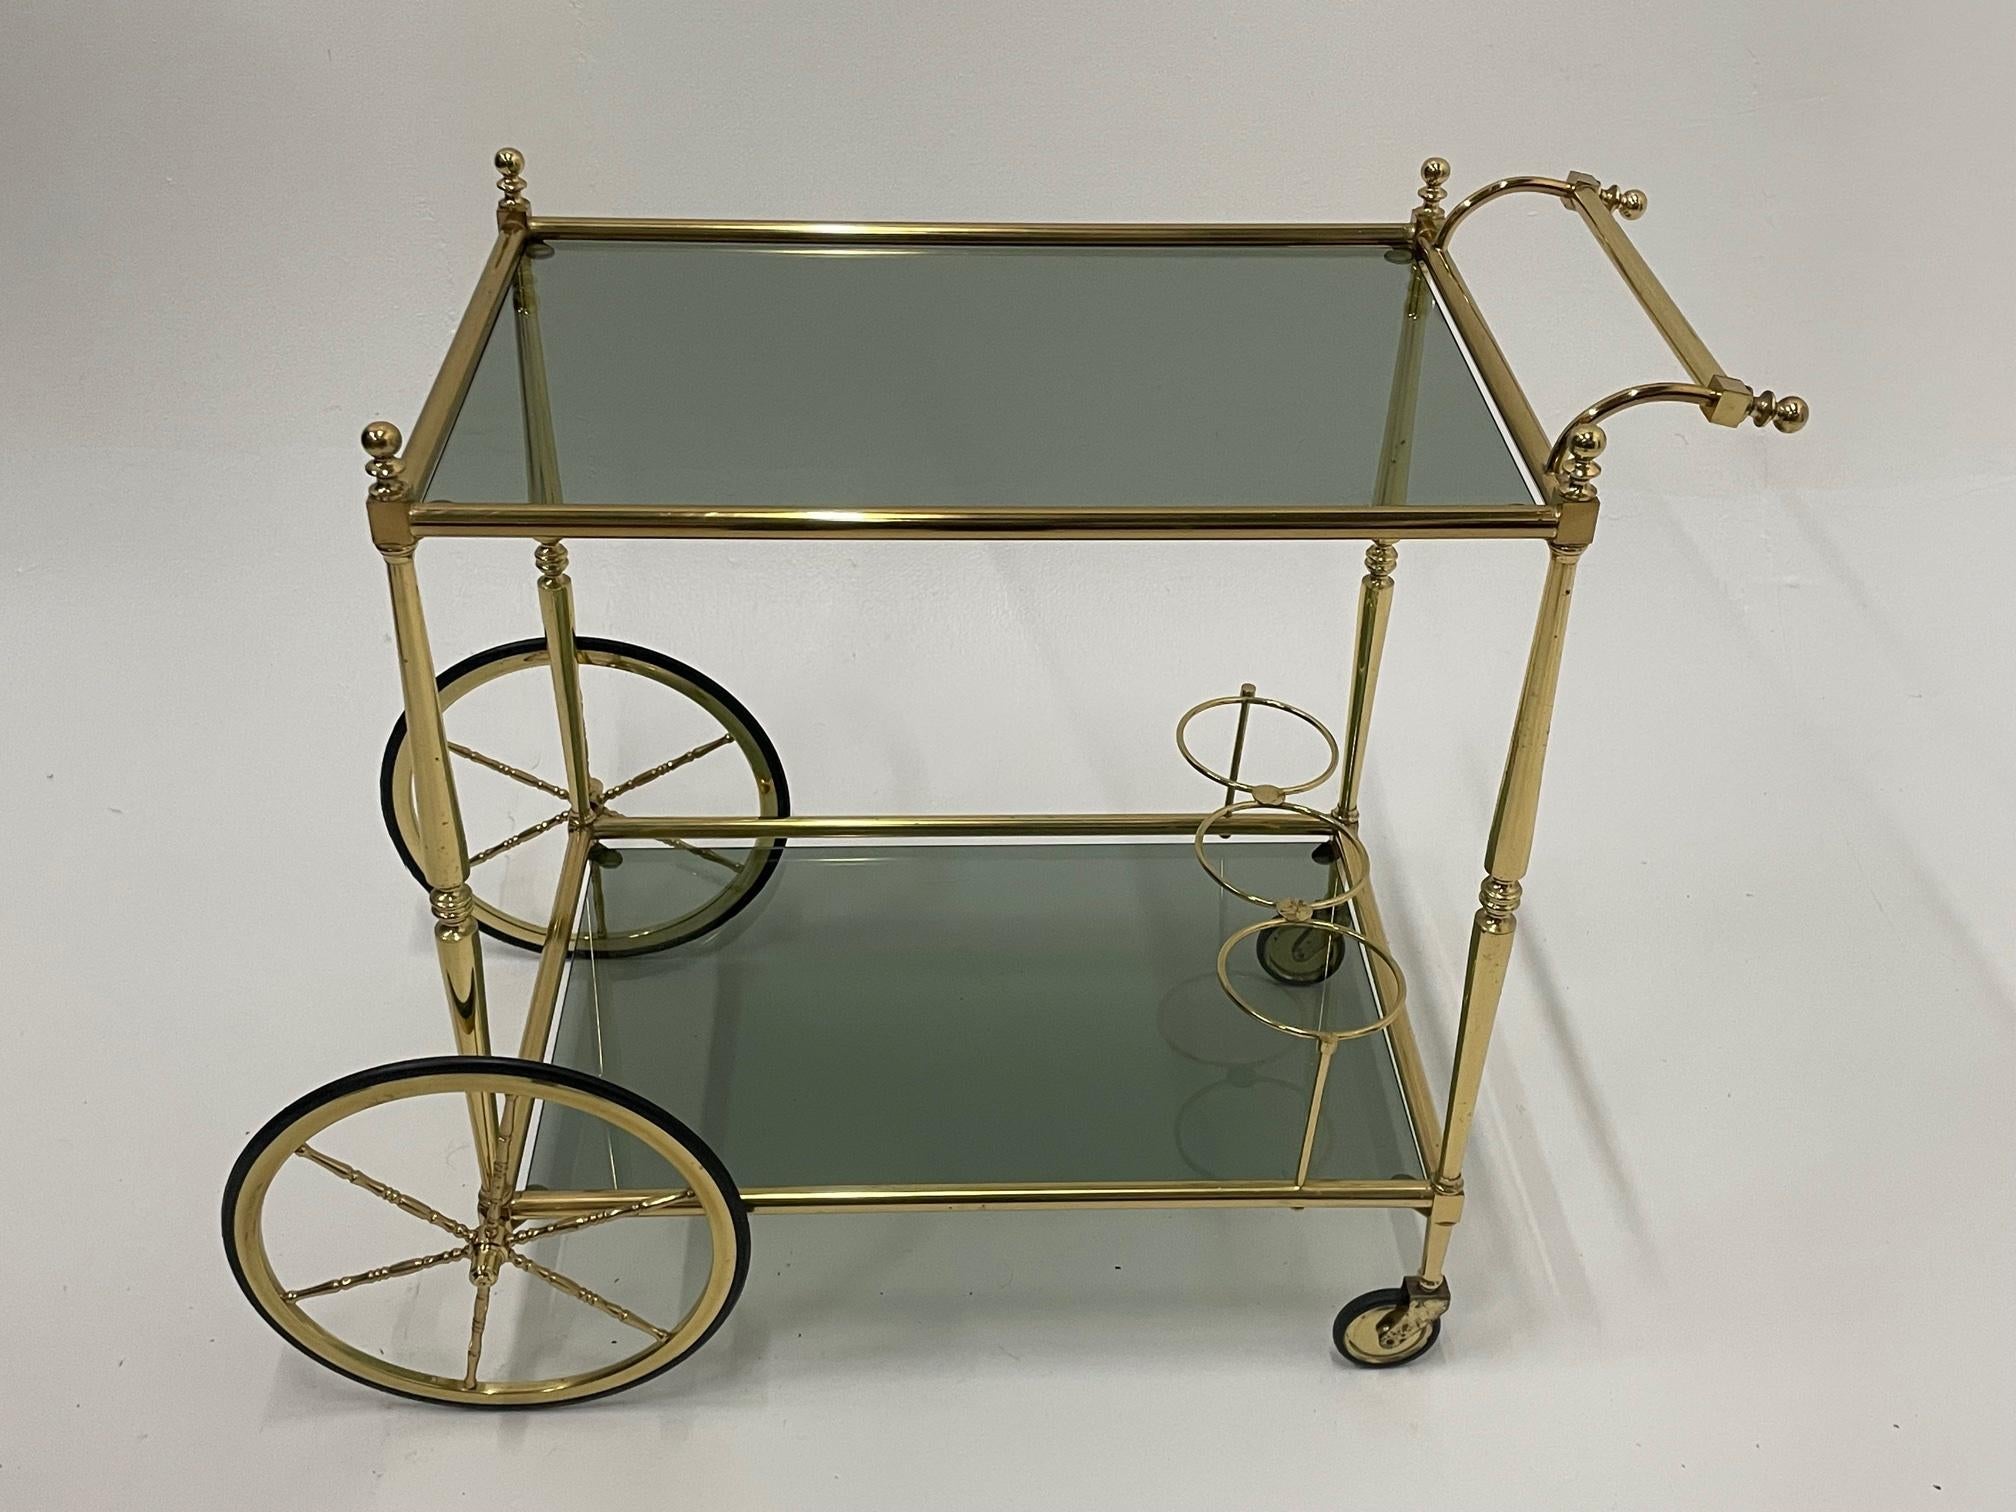 Glamorous and functional Mid-Century Modern brass bar cart having two tiers of smoky glass and a wine rack on the bottom. 27 h to top of handle
Lower tier is 7